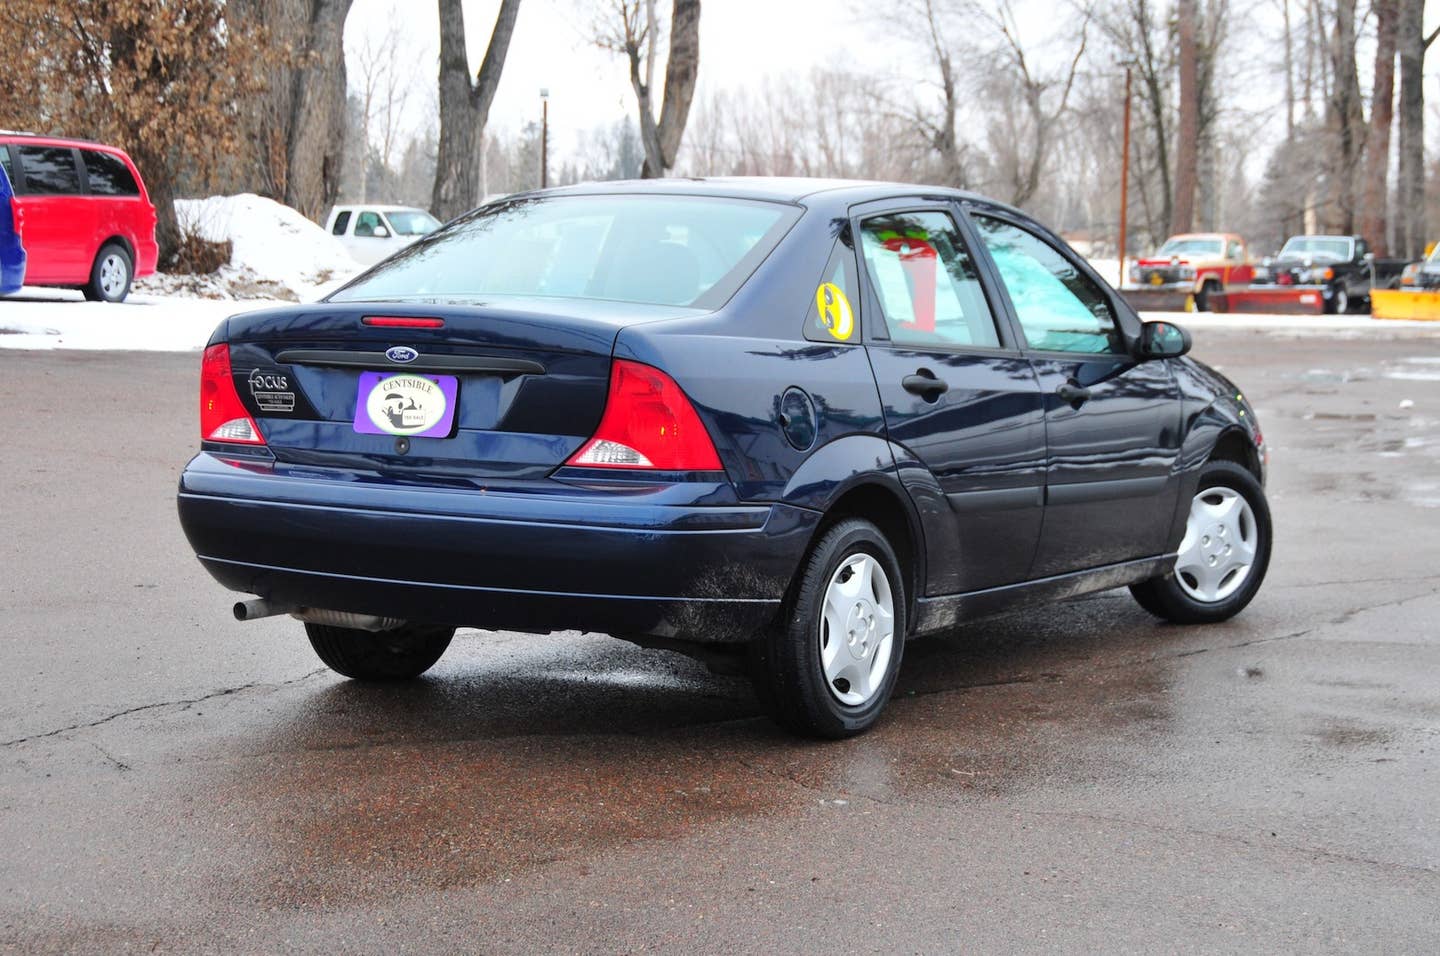 Preserved 2002 Ford Focus LX with 117 miles